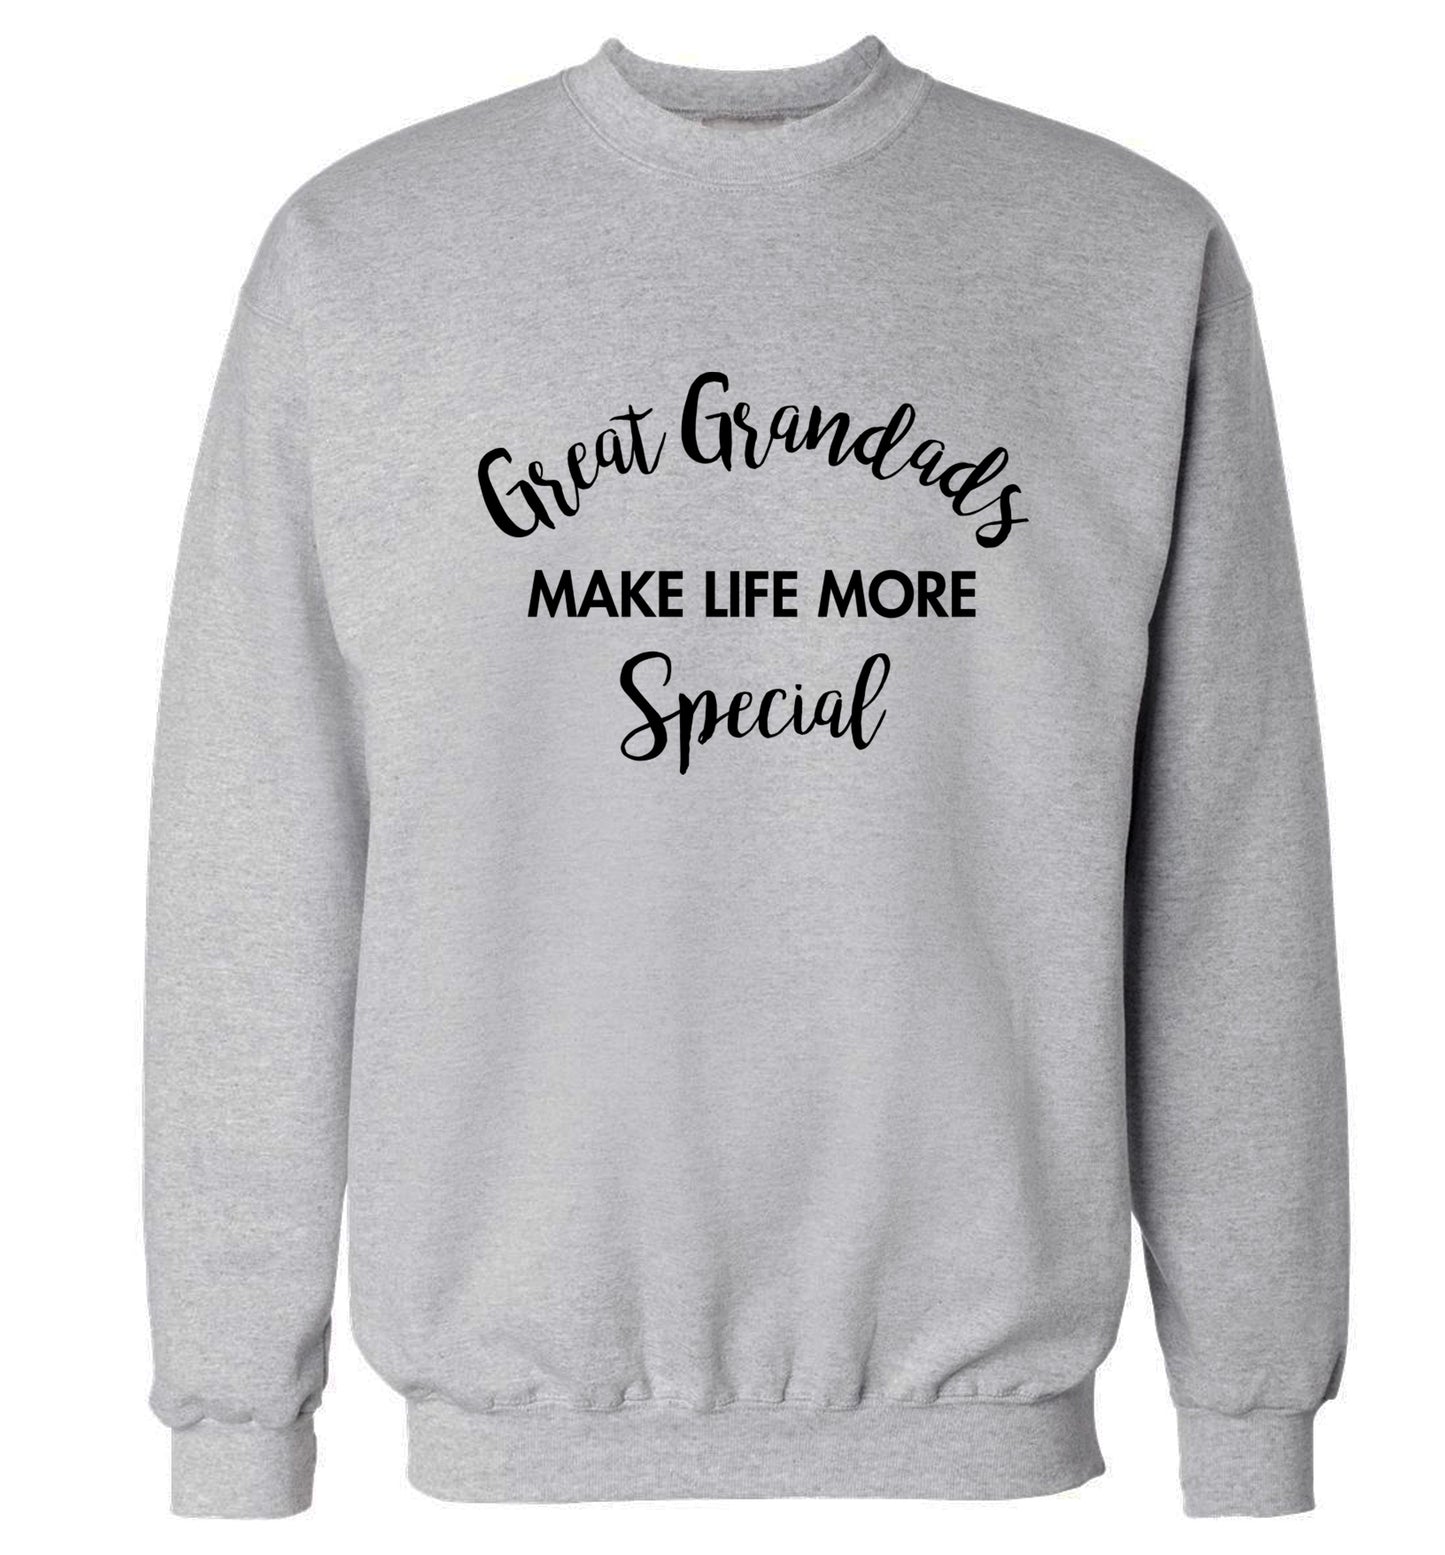 Great Grandads make life more special Adult's unisex grey Sweater 2XL